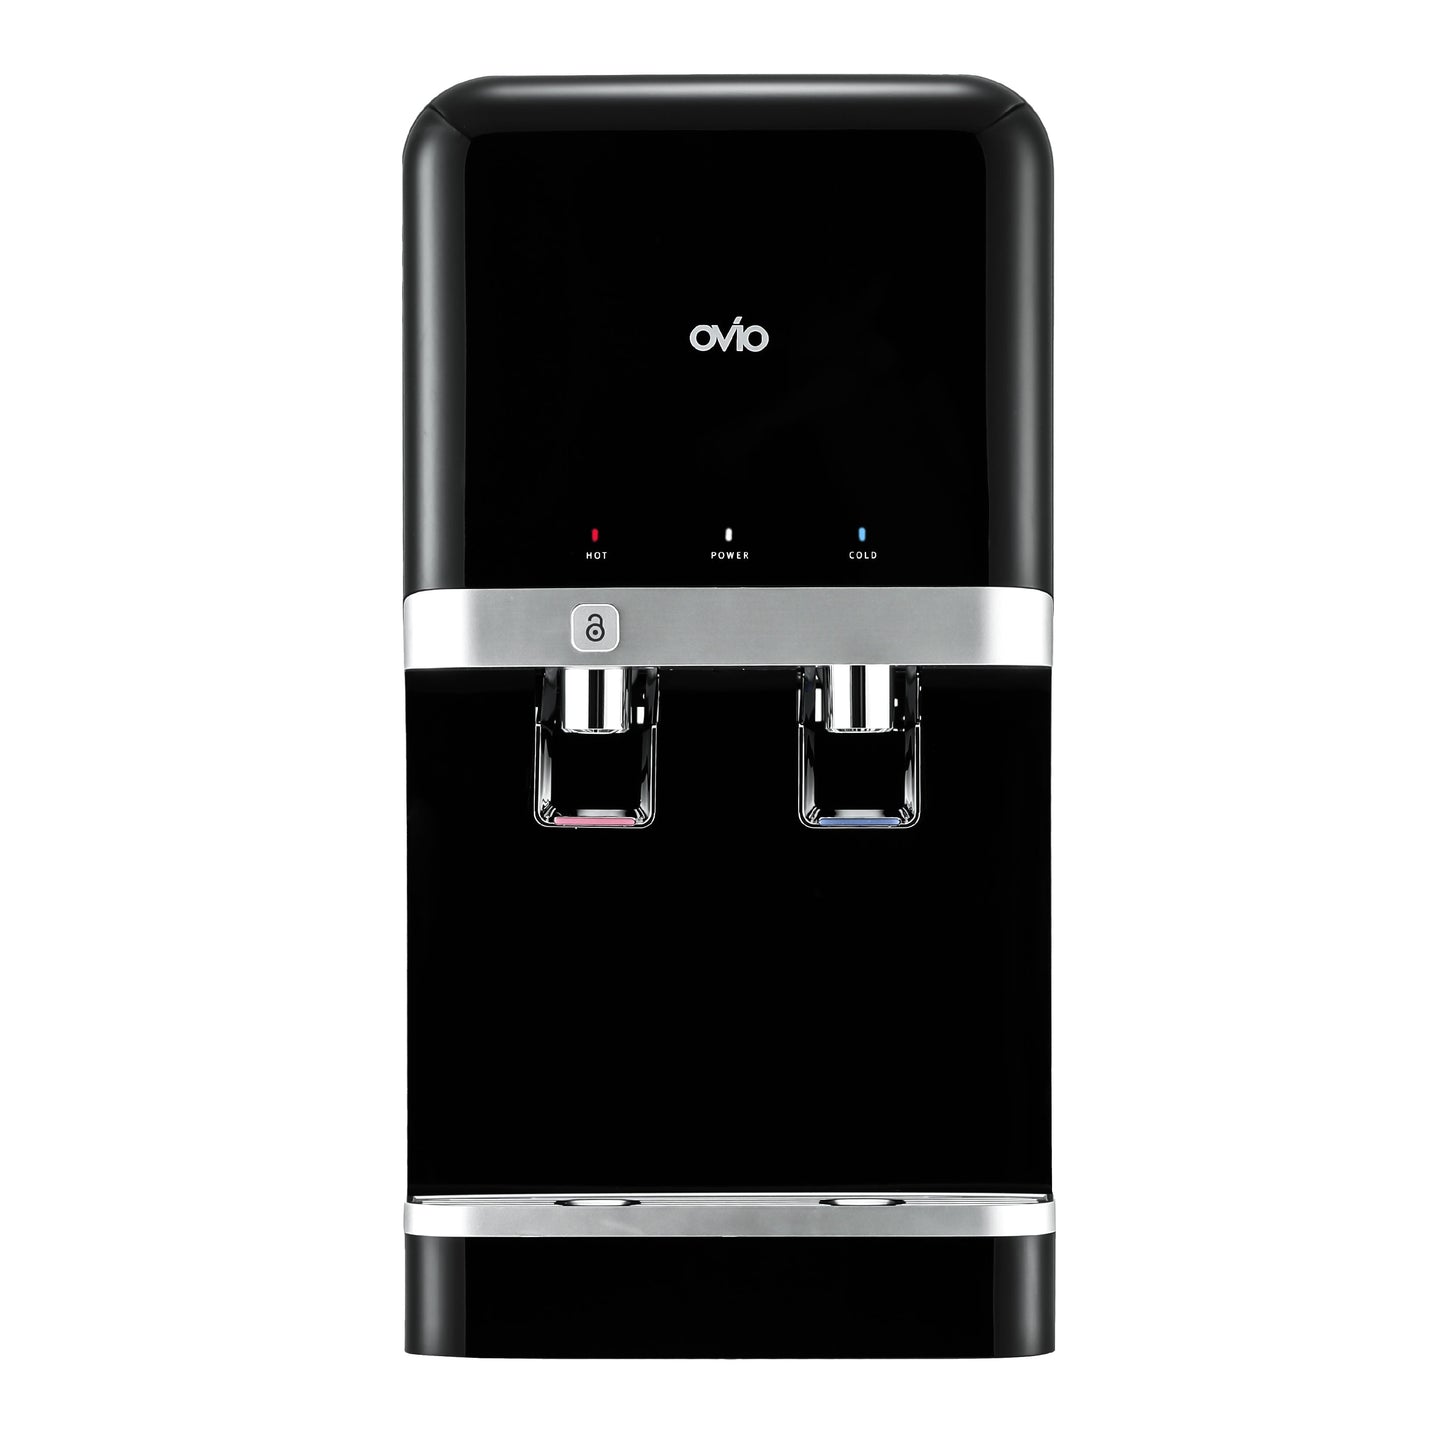 Auxano Health Hot and Cold Purified Water Dispenser OHC-200U 